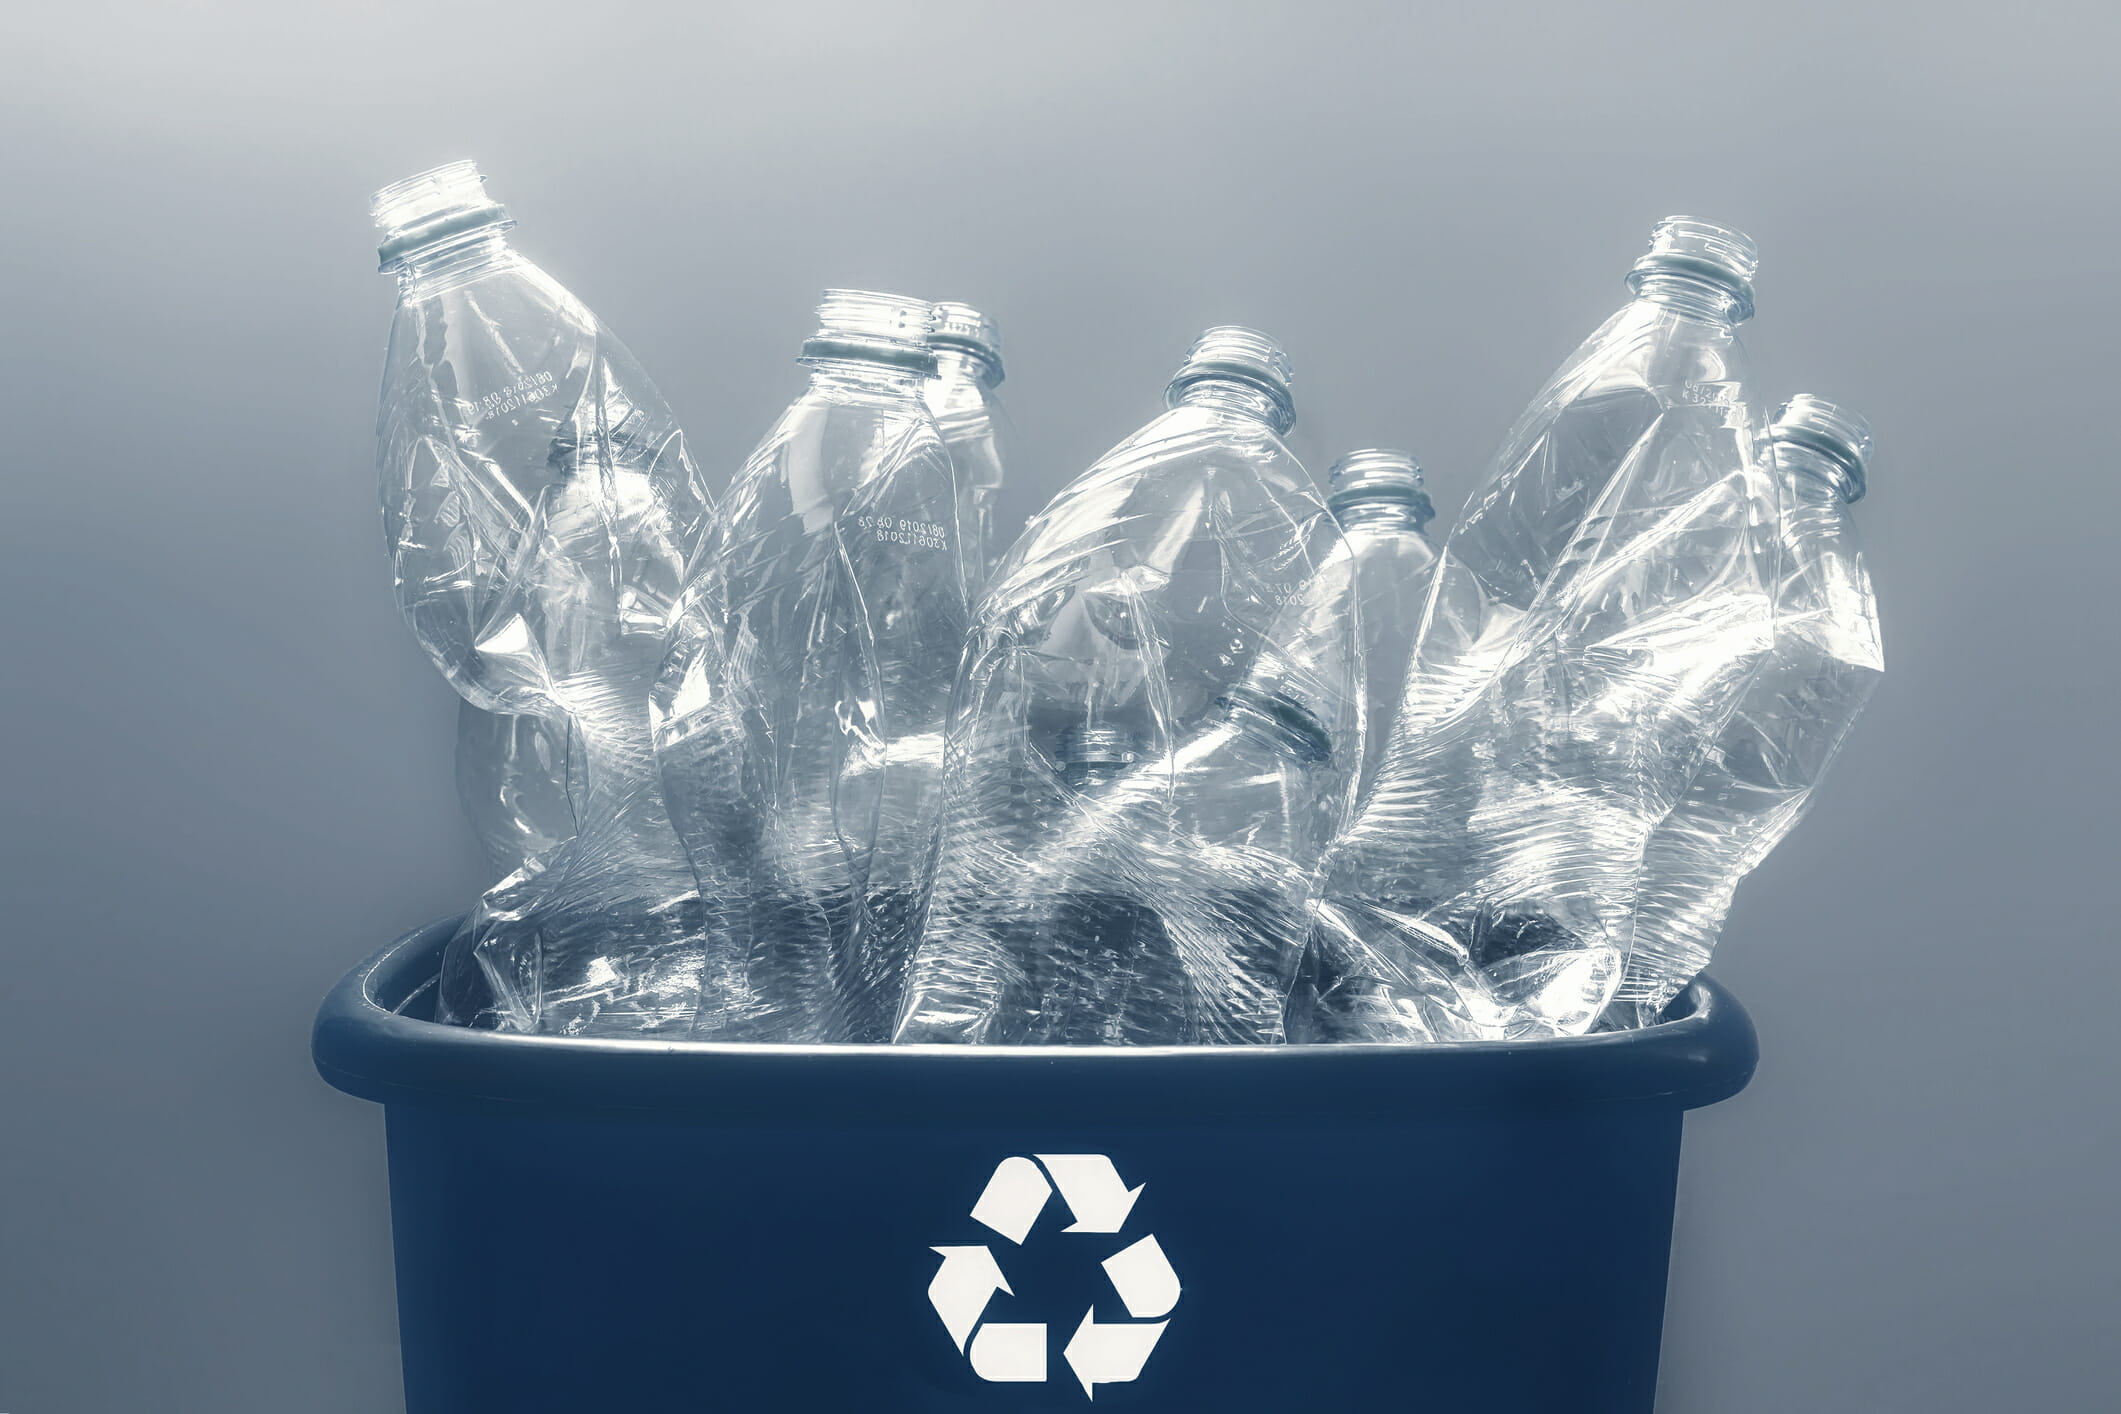 Plastic bottles in a blue recycling container box. Studio shot with natural lighting.